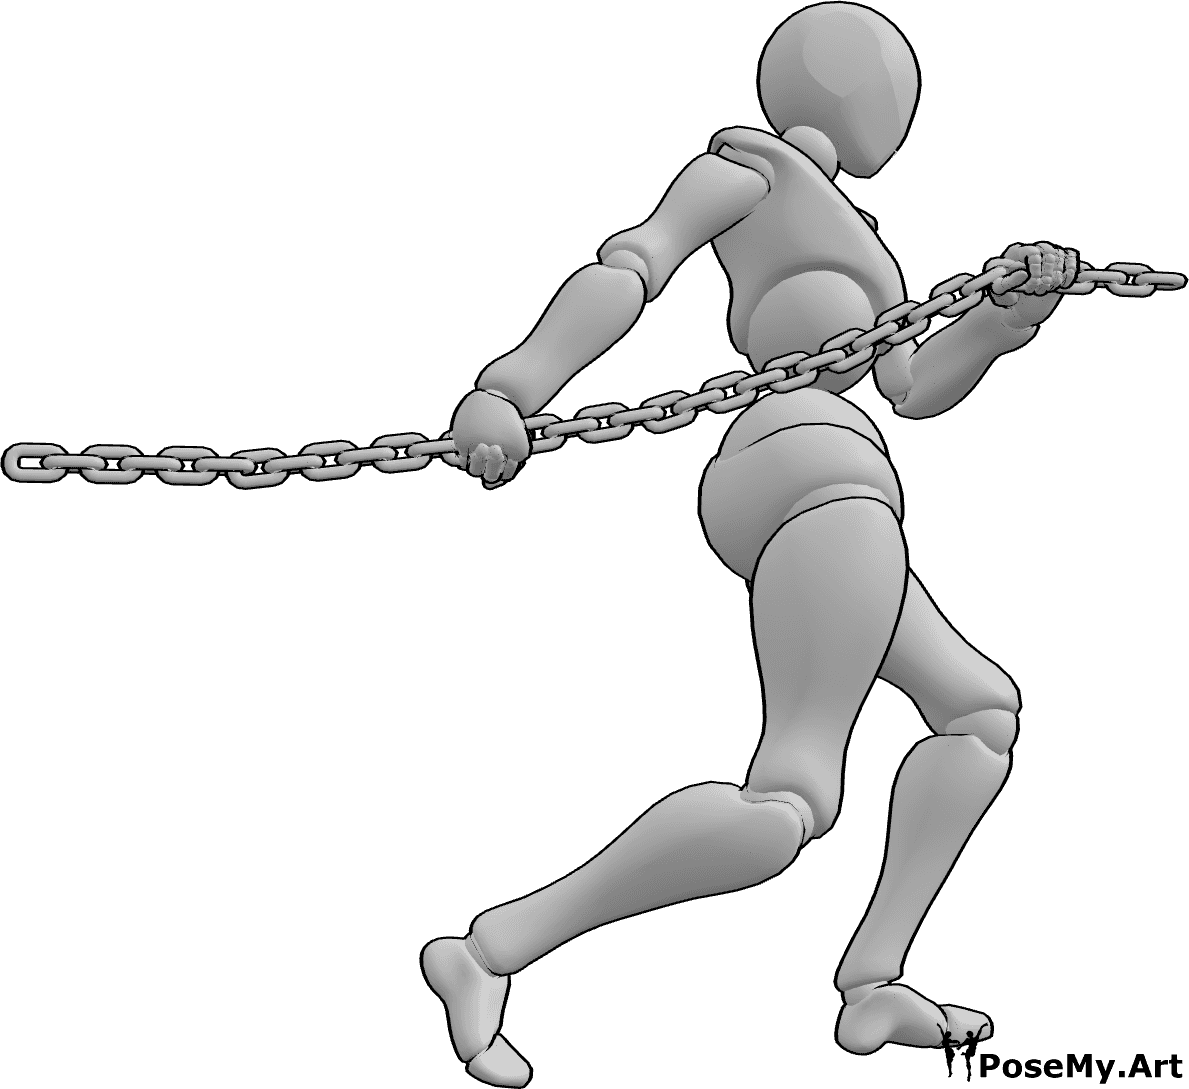 Pose Reference- Female walking pulling pose - Female is walking and pulling a chain with two hands